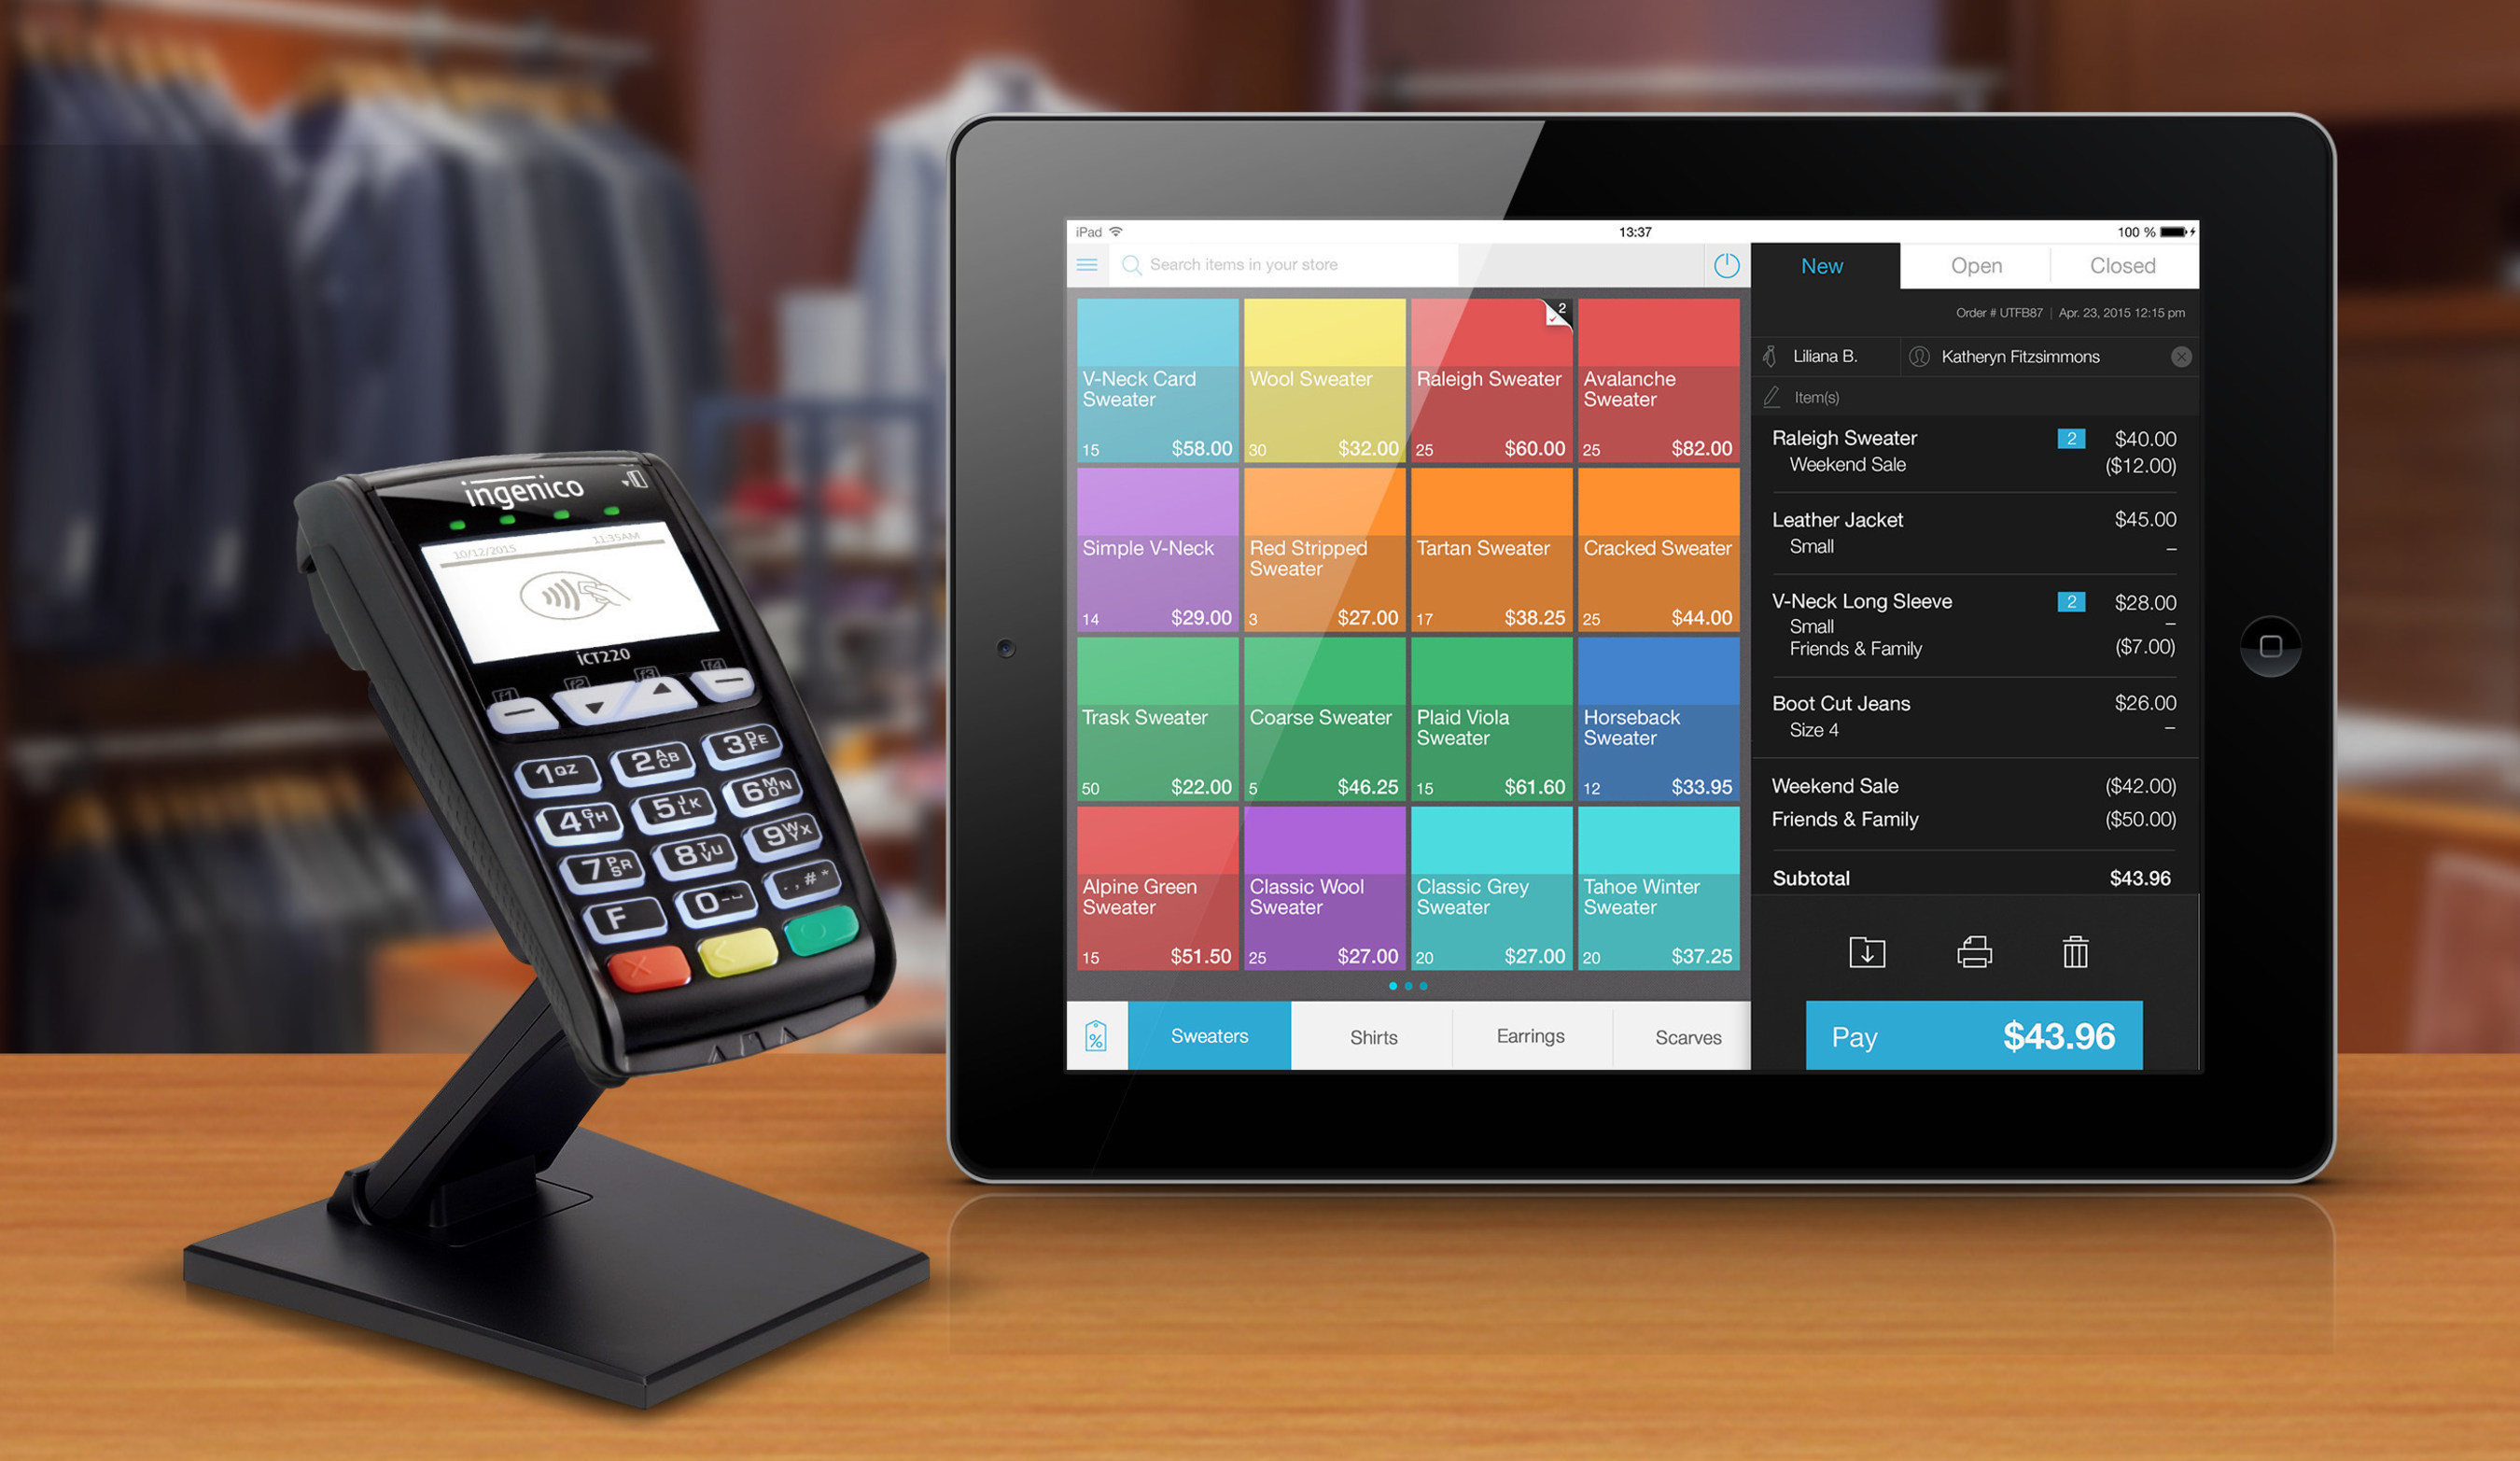 talech's cloud-based point of sale solution paired with Ingenico's iCT220 terminal makes for an easy EMV ready solution for small businesses.